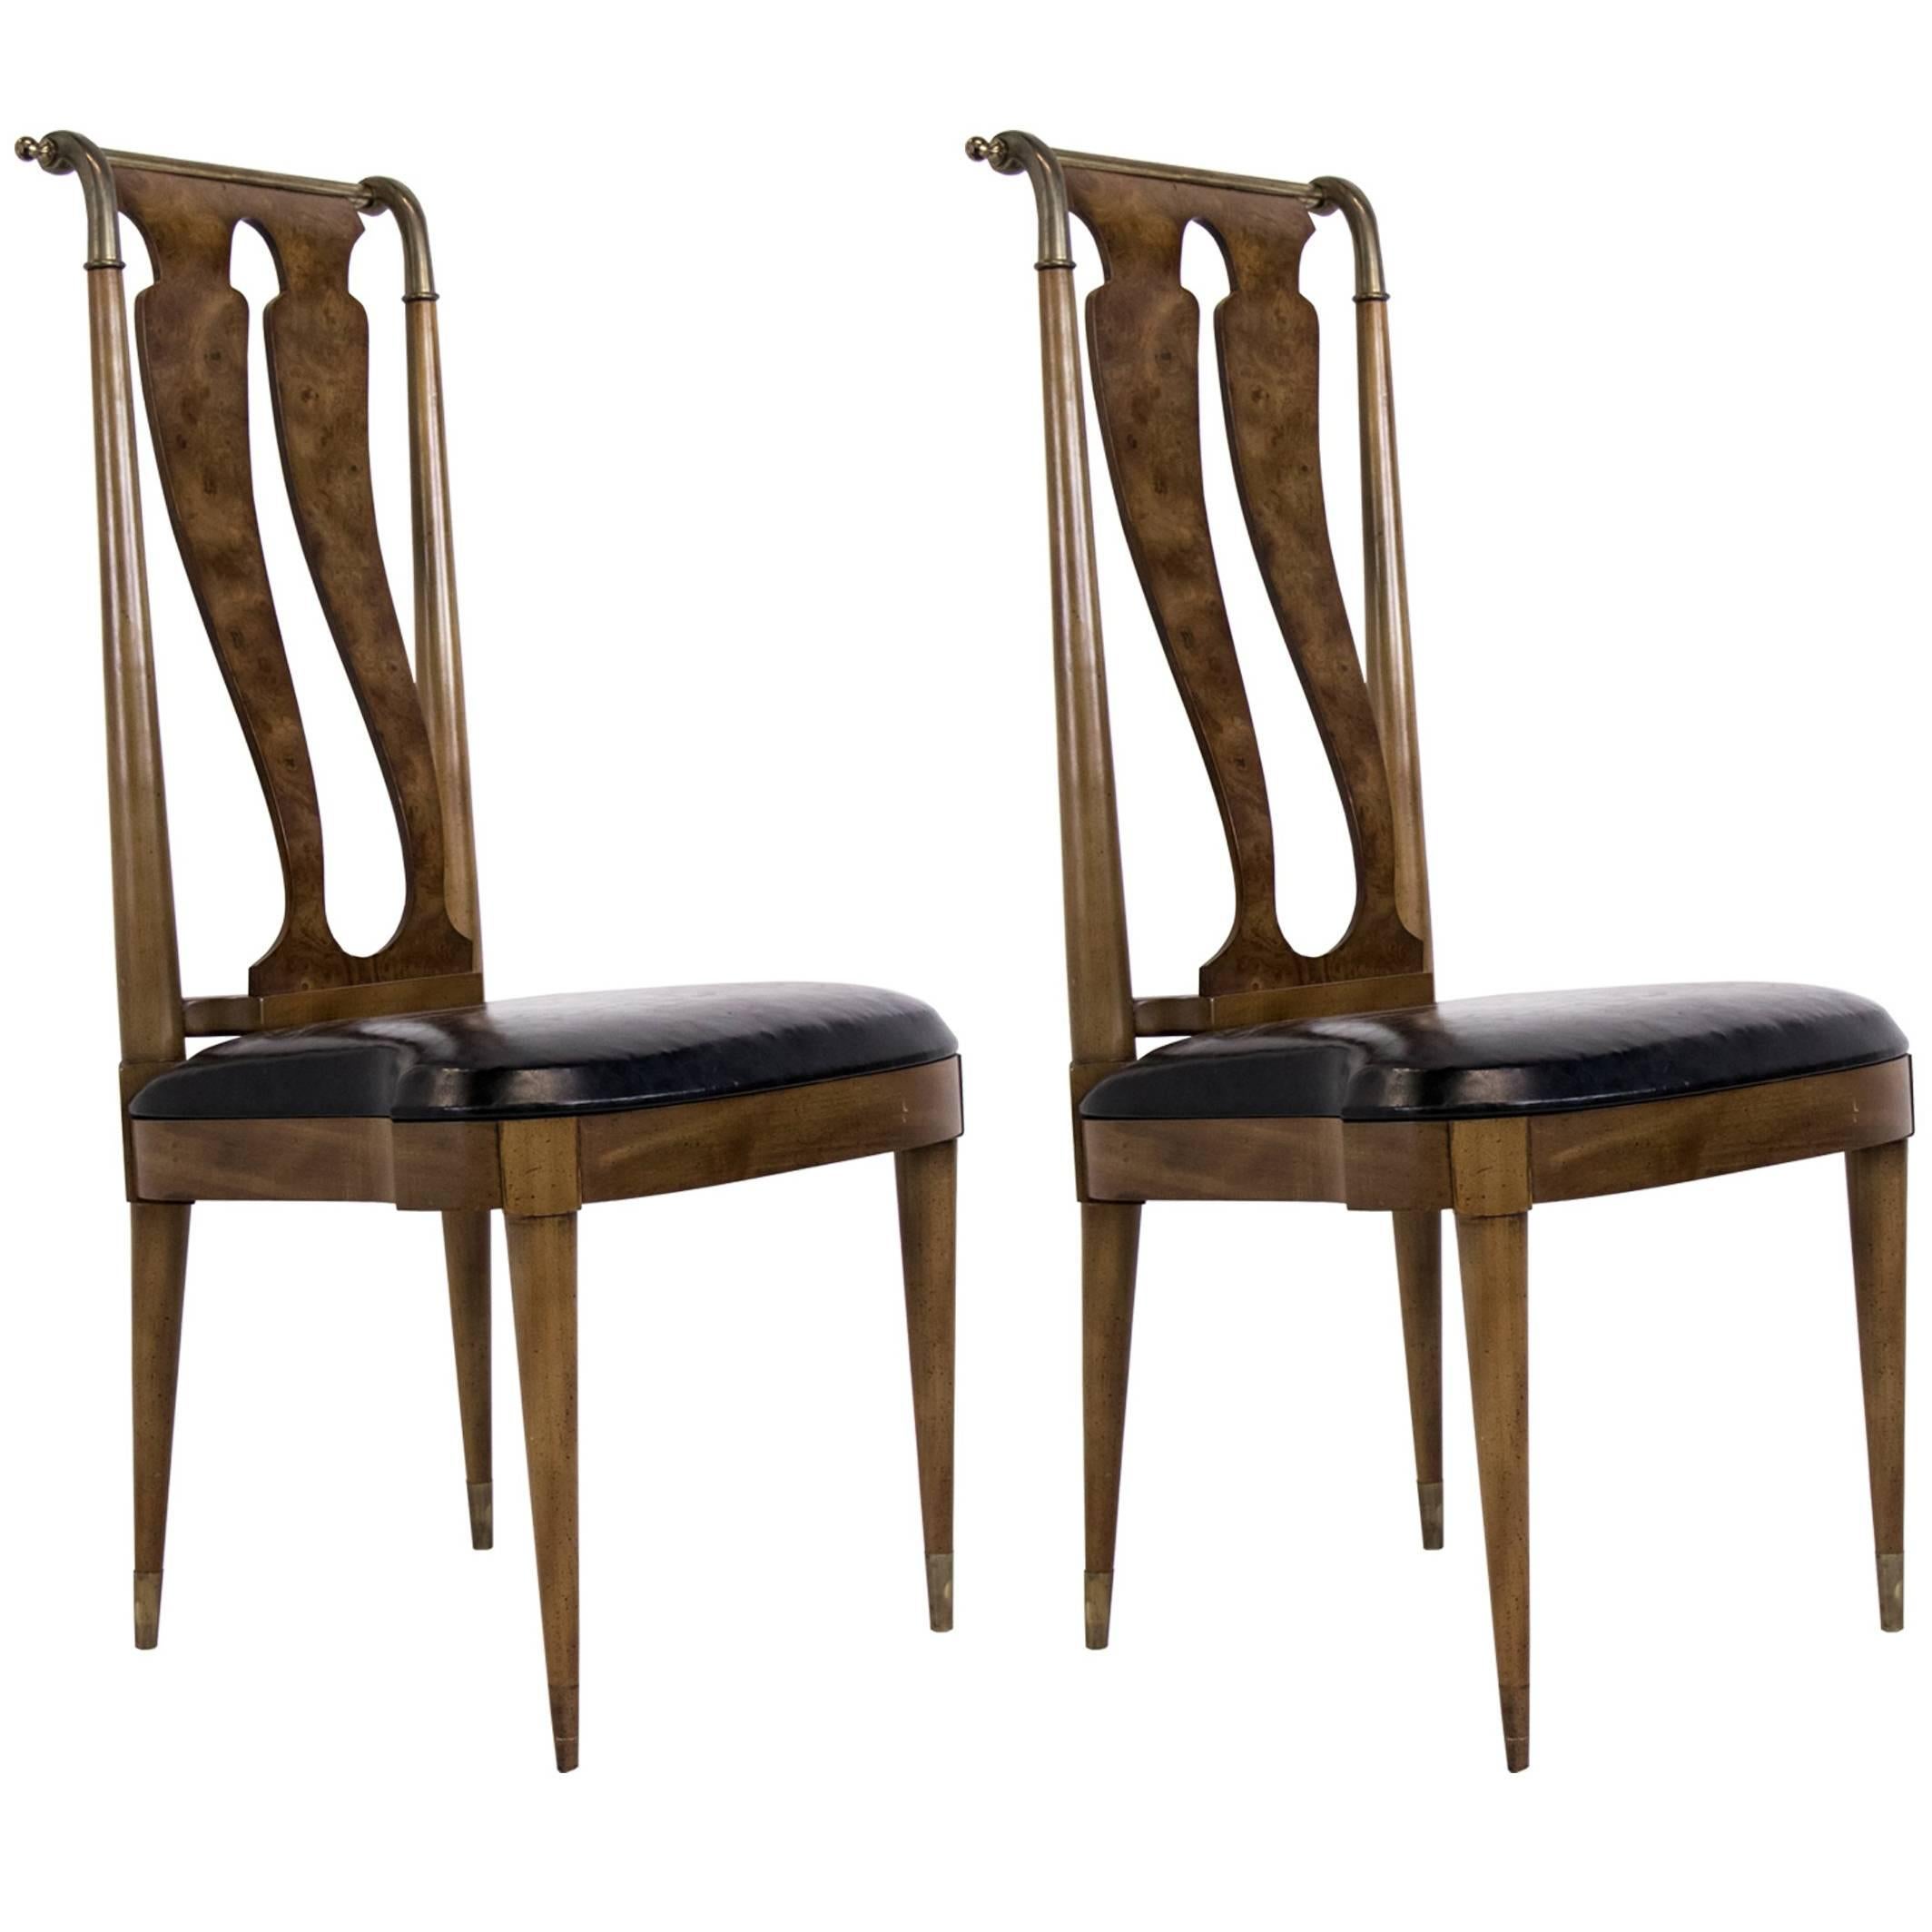 Pair of Italianate Burl Wood and Brass Side Chairs